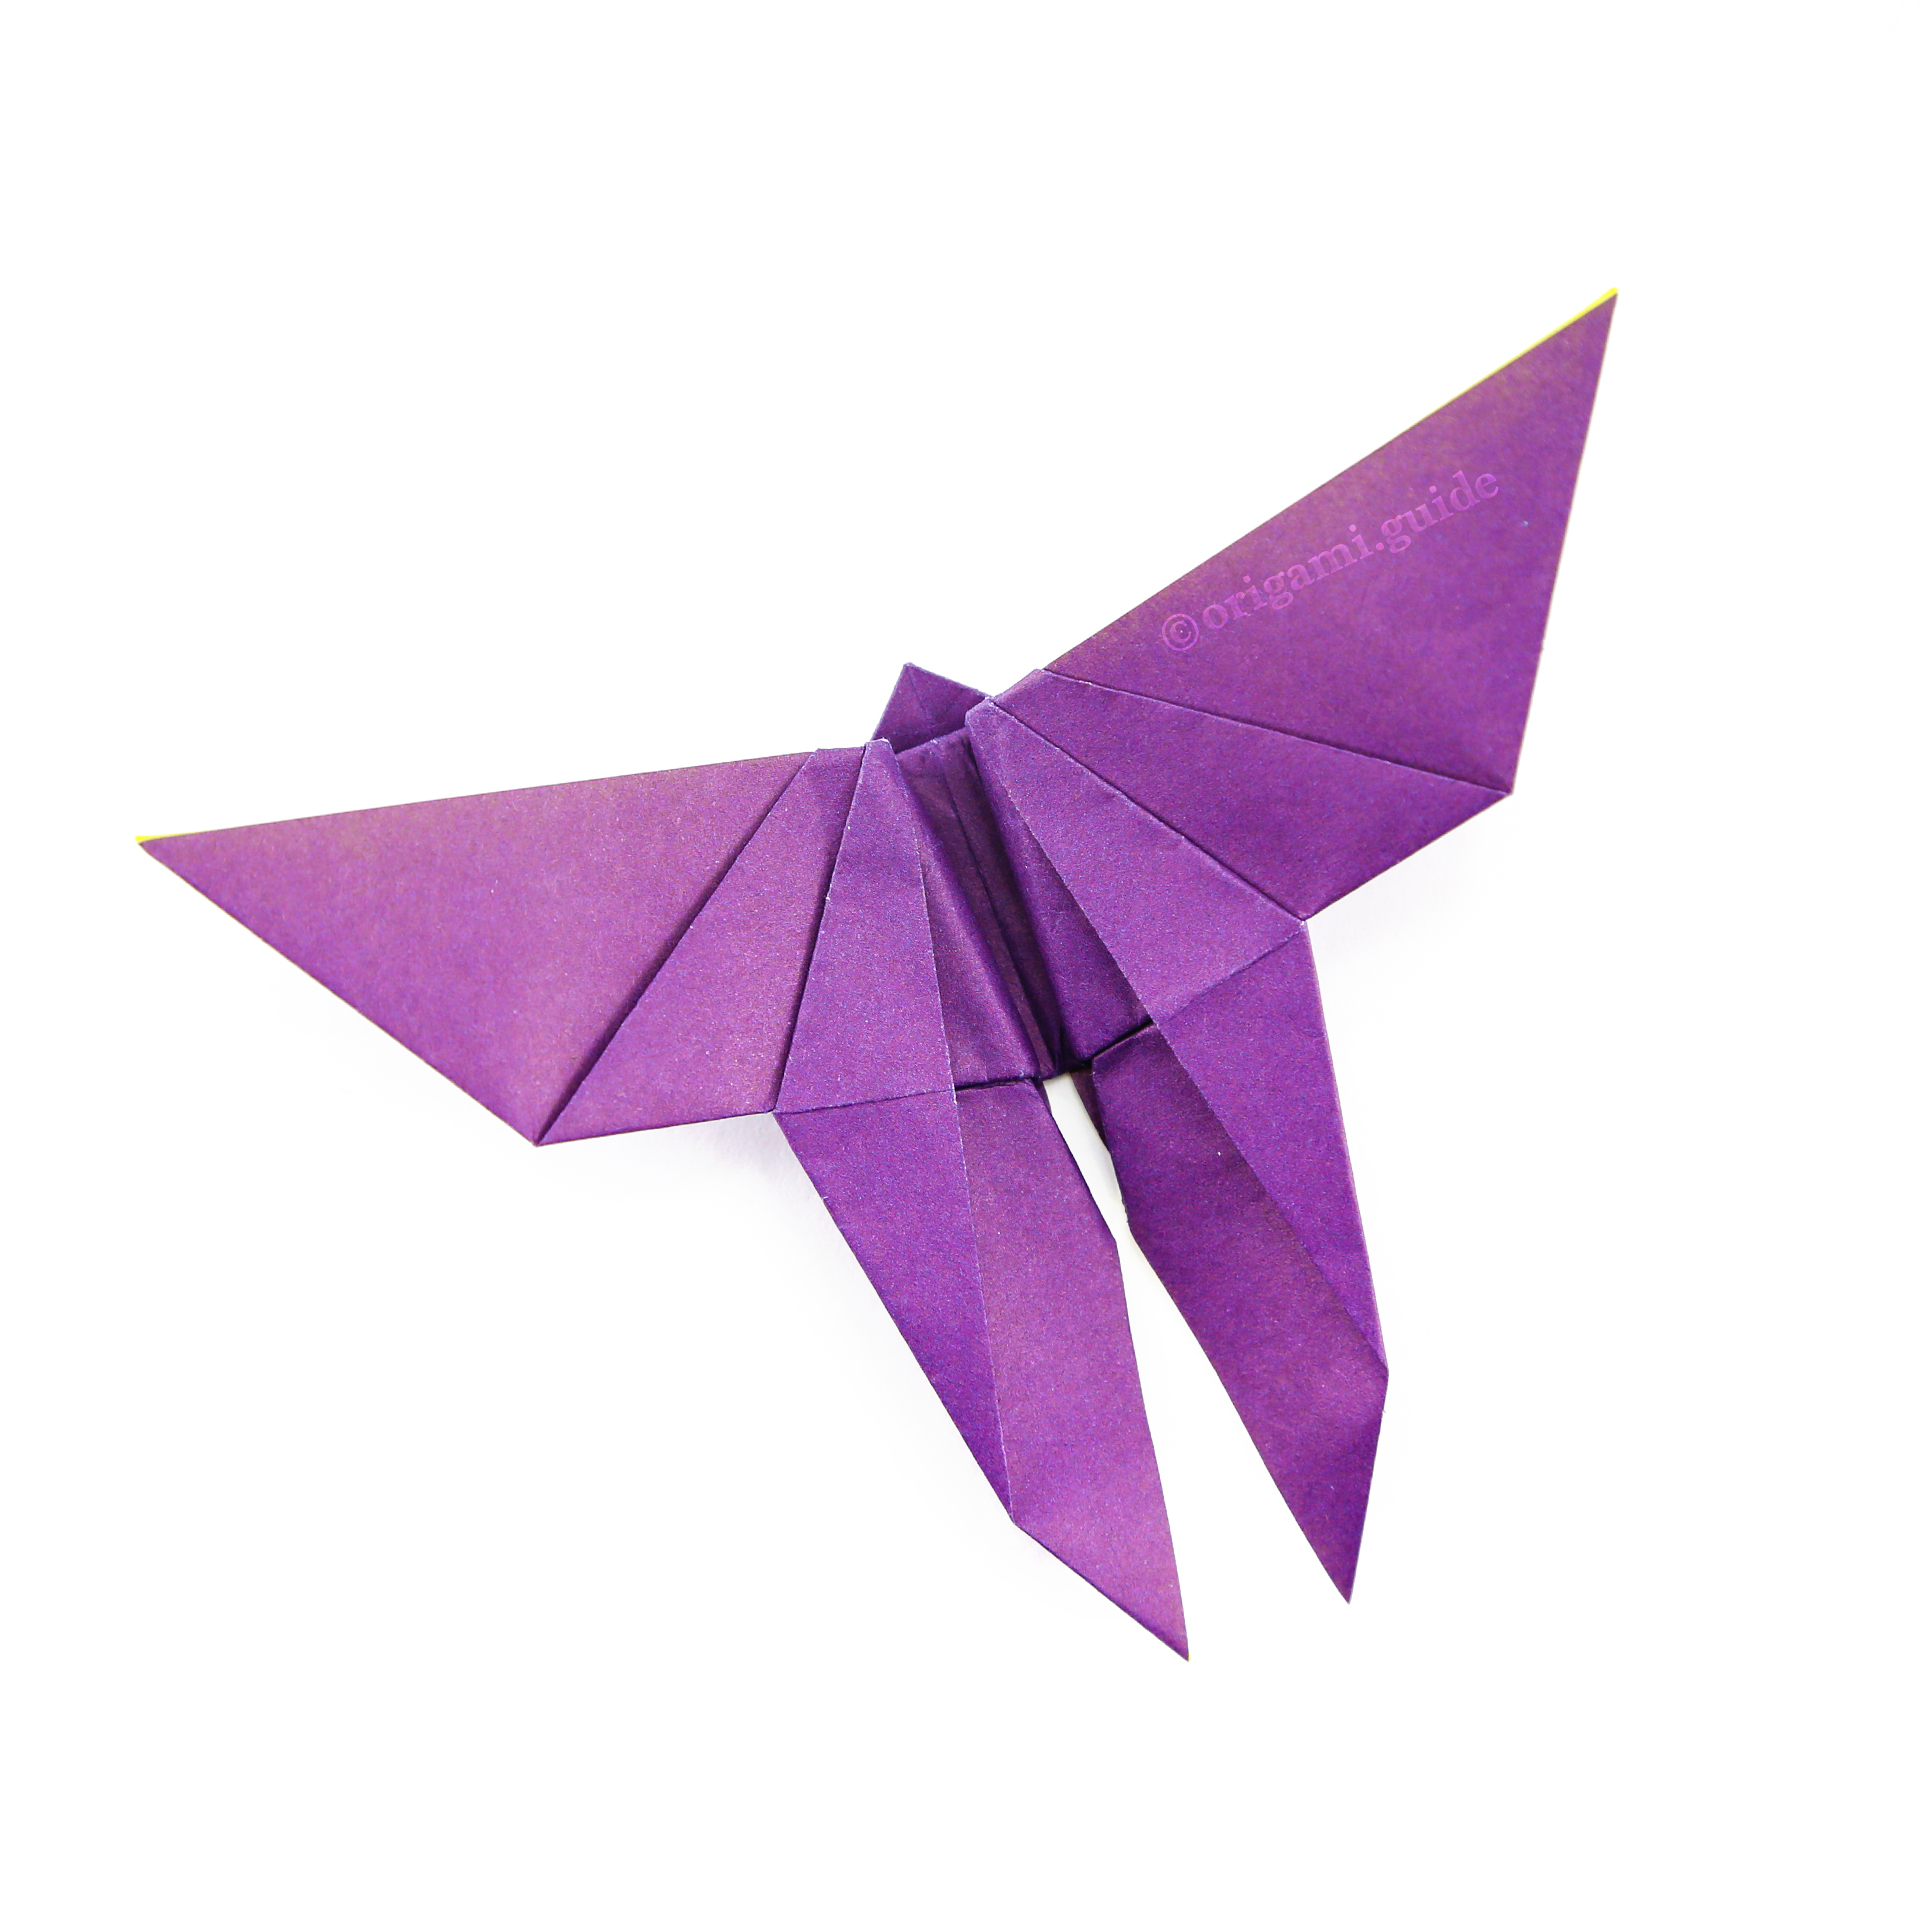 How To Make An Origami Butterfly Folding Instructions Origami Guide